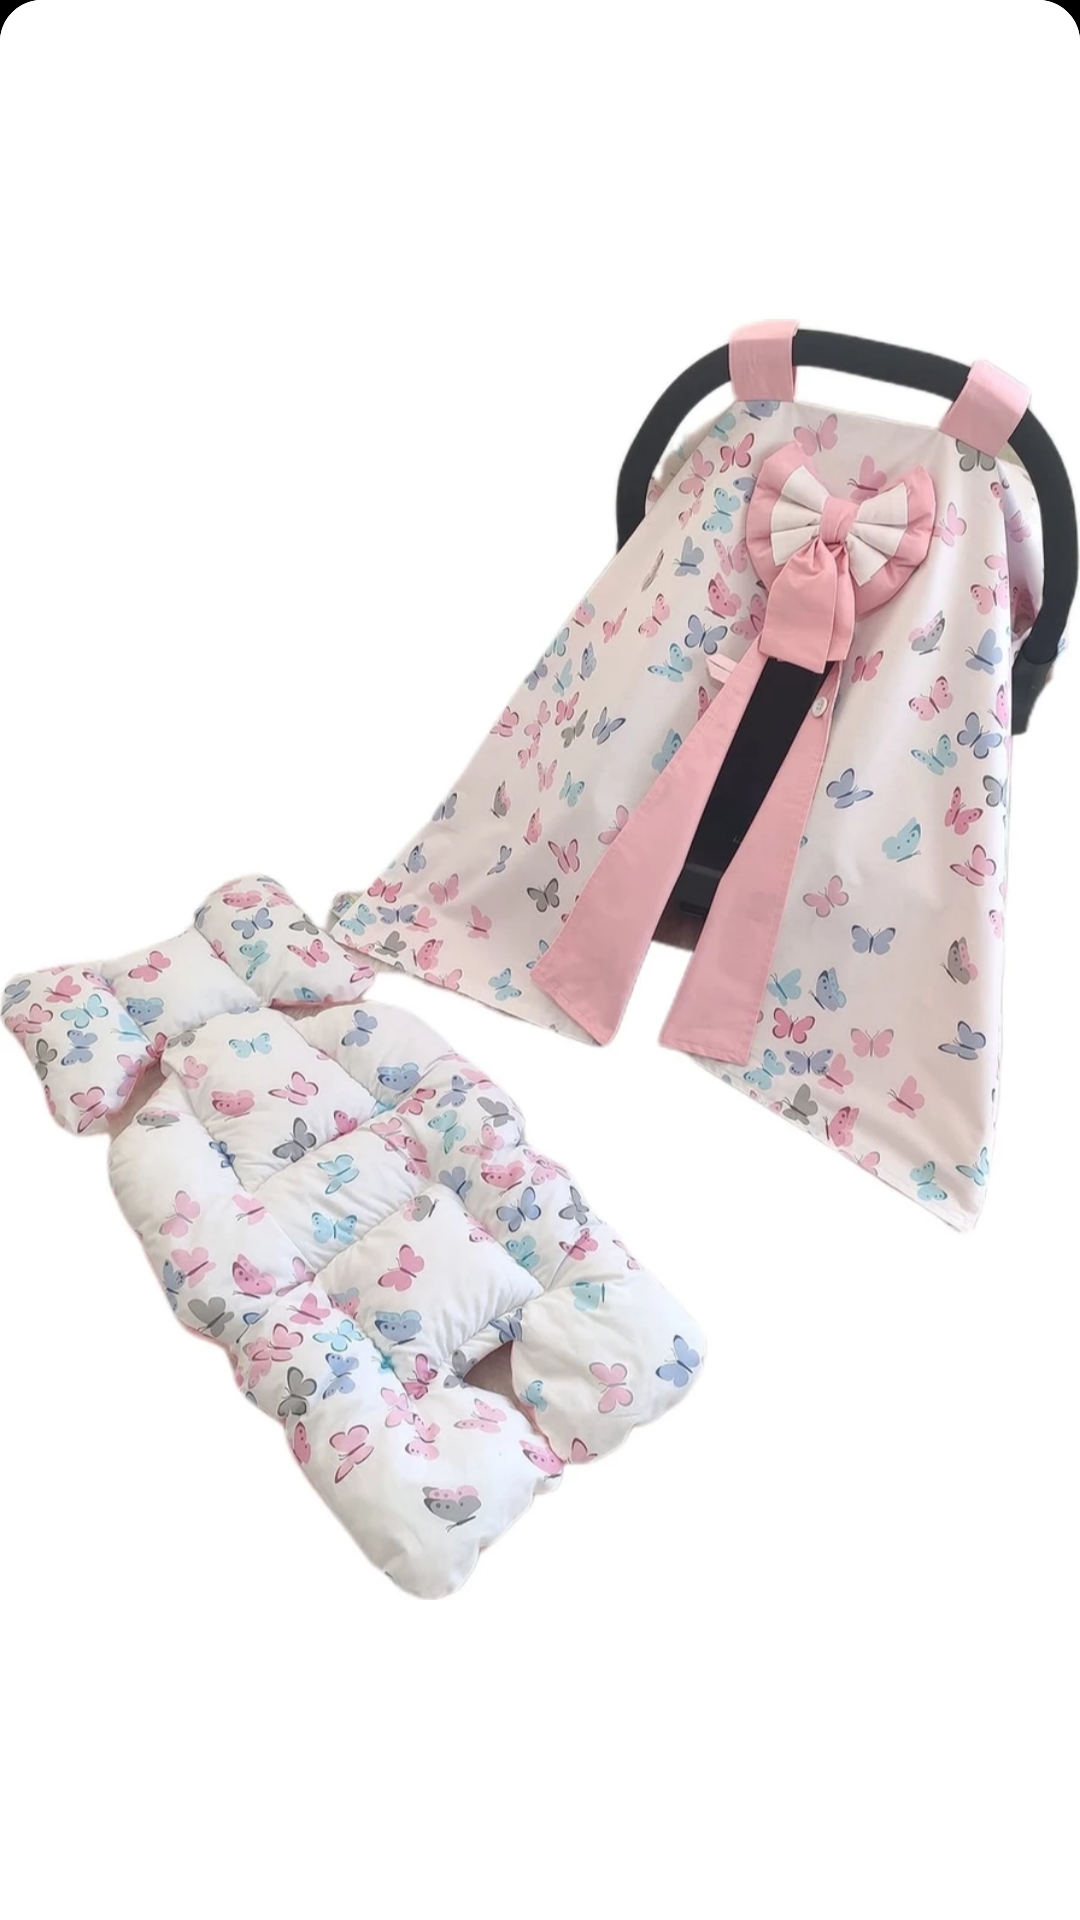 Stroller Cover and Inner Pillow Pink-White